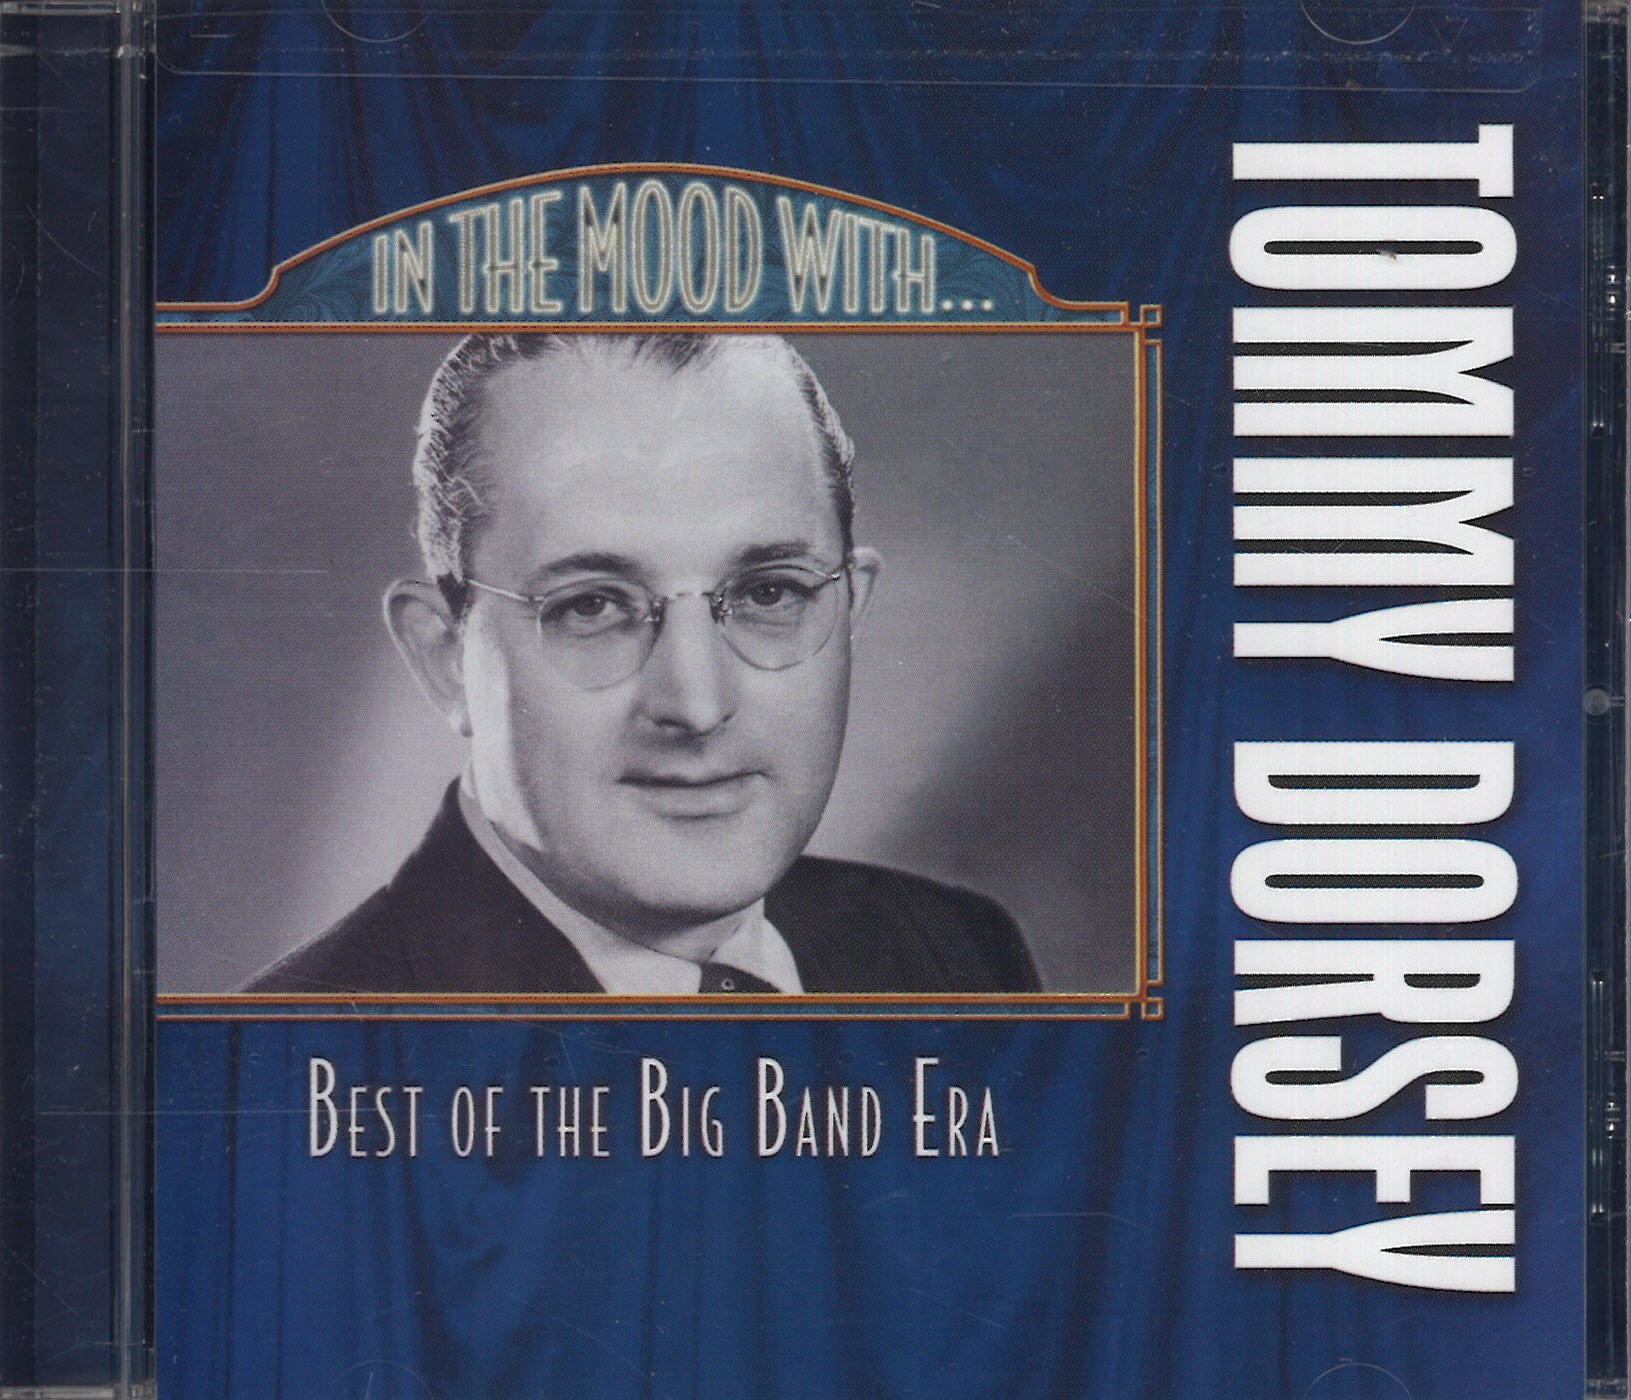 In The Mood With Tommy Dorsey